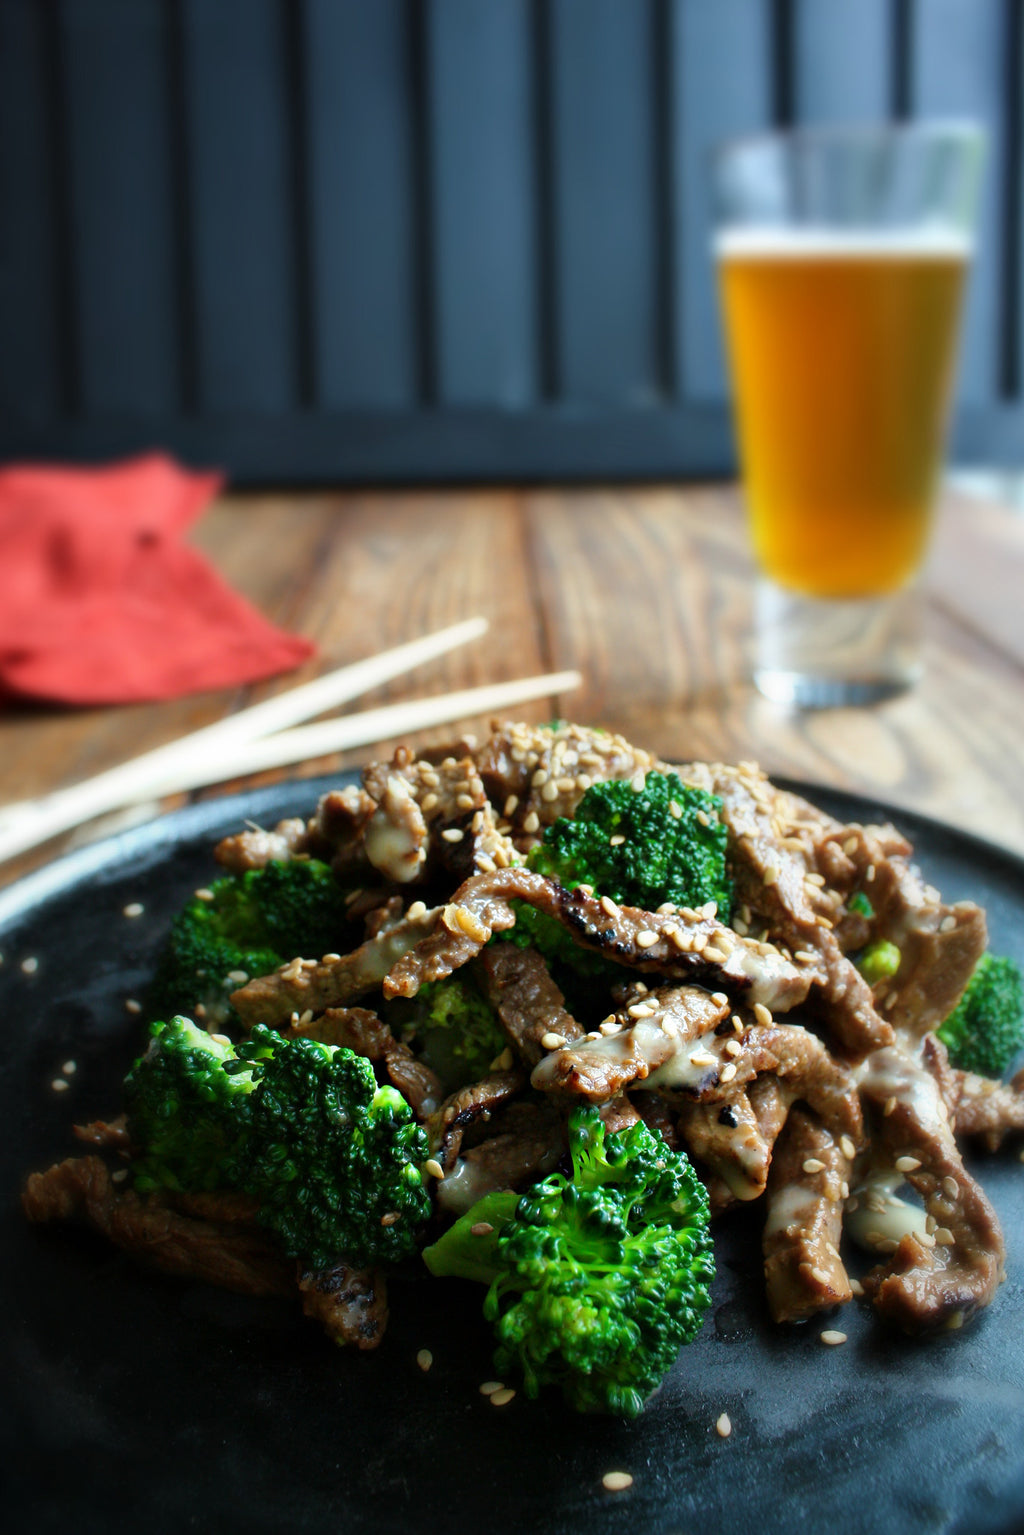 Japanese Sesame Beef and Broccoli | Wozz! Kitchen Creations